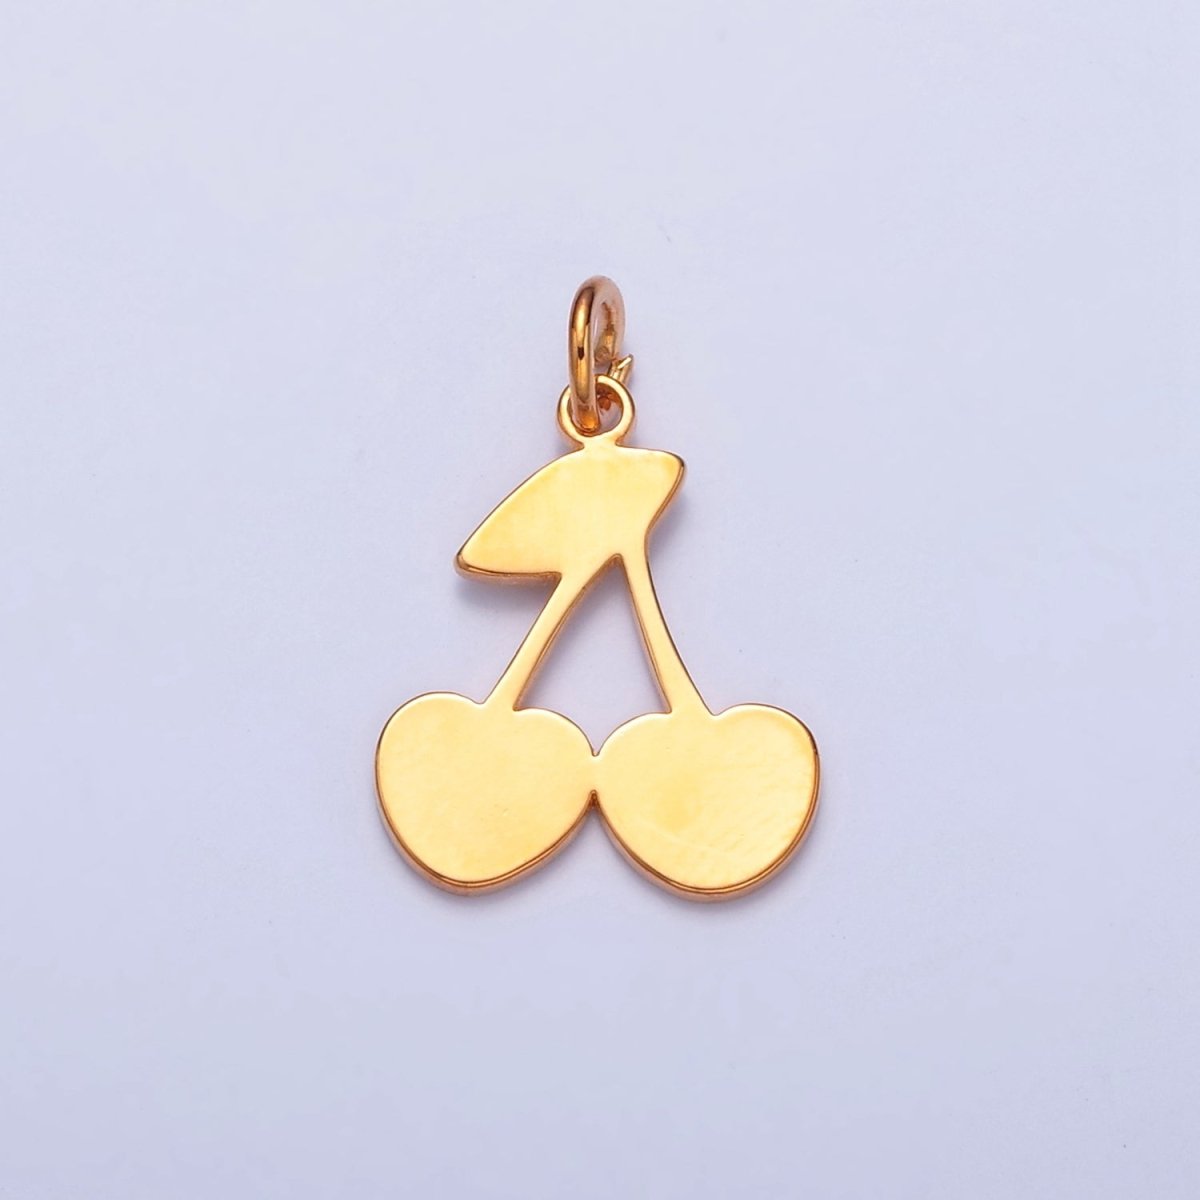 OS Dainty Gold Flat Cherry Pendant Only Charm for Necklace Bracelet Earring 14K or 24K Gold Filled W-252 W-468 - DLUXCA